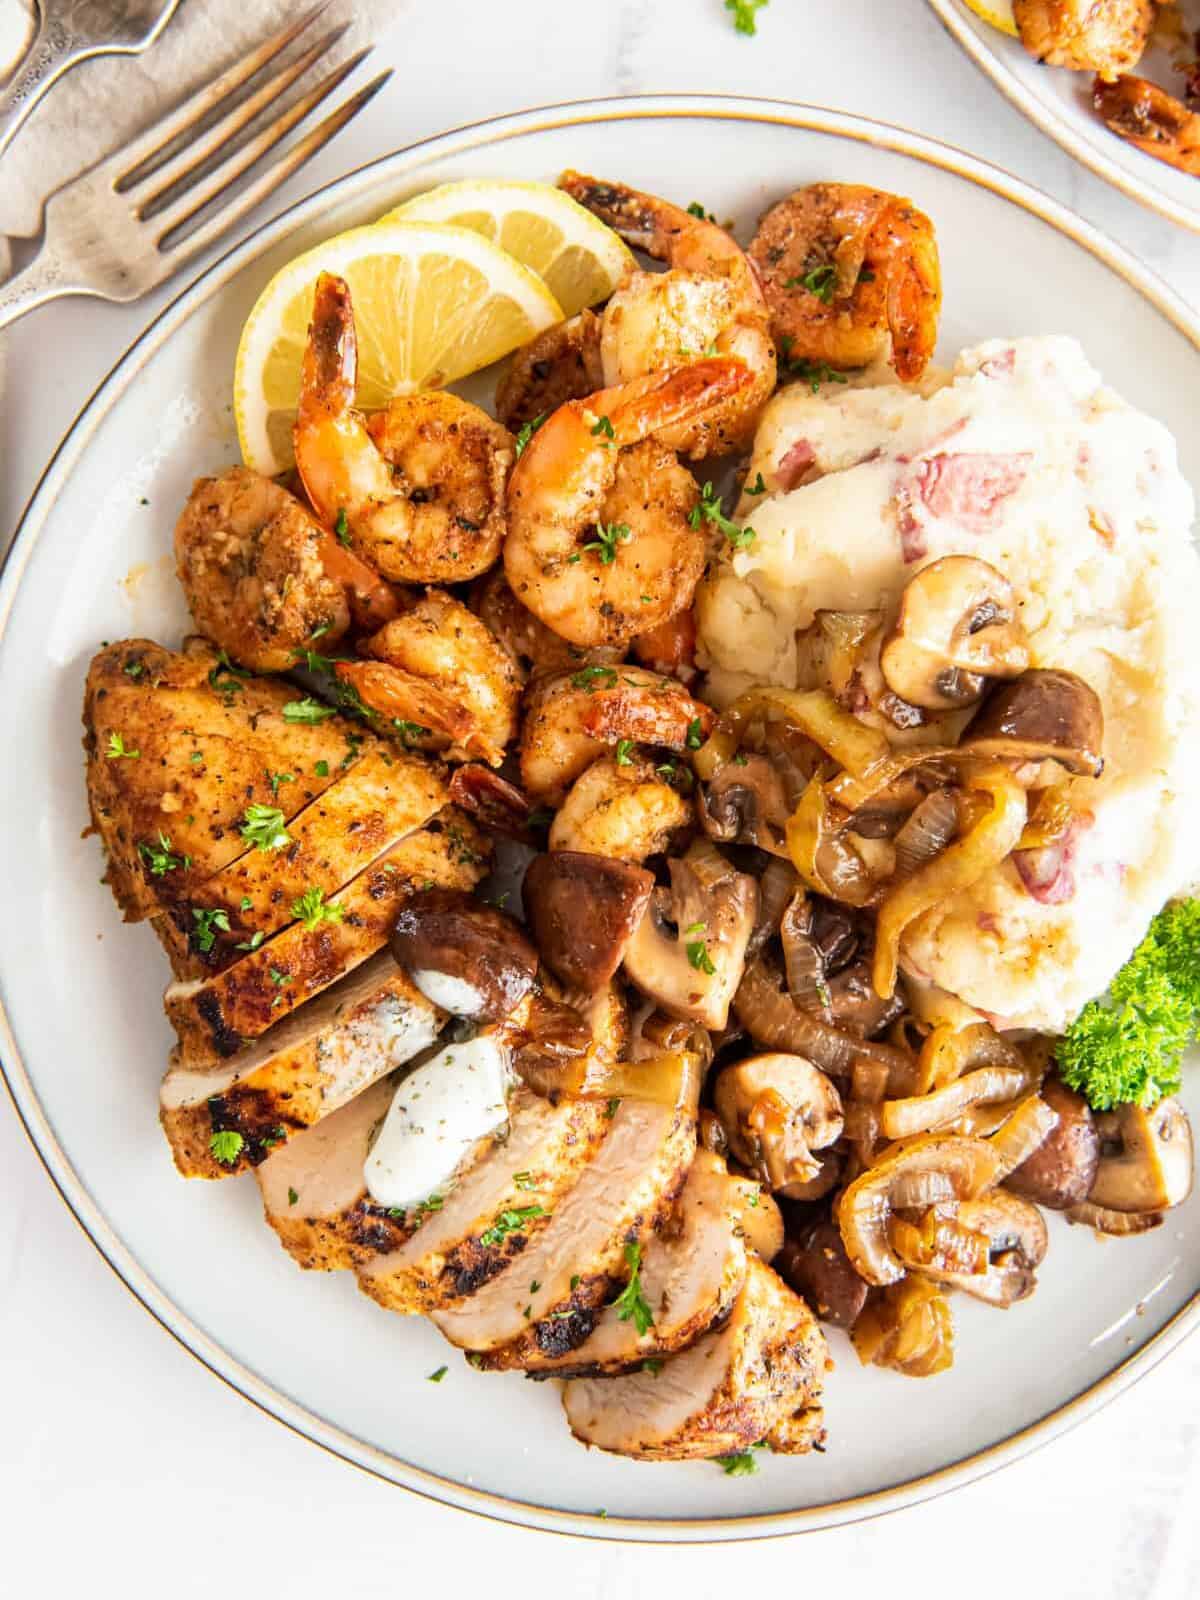 applebees bourbon street chicken and shrimp with mashed potatoes and mushrooms on a white plate.